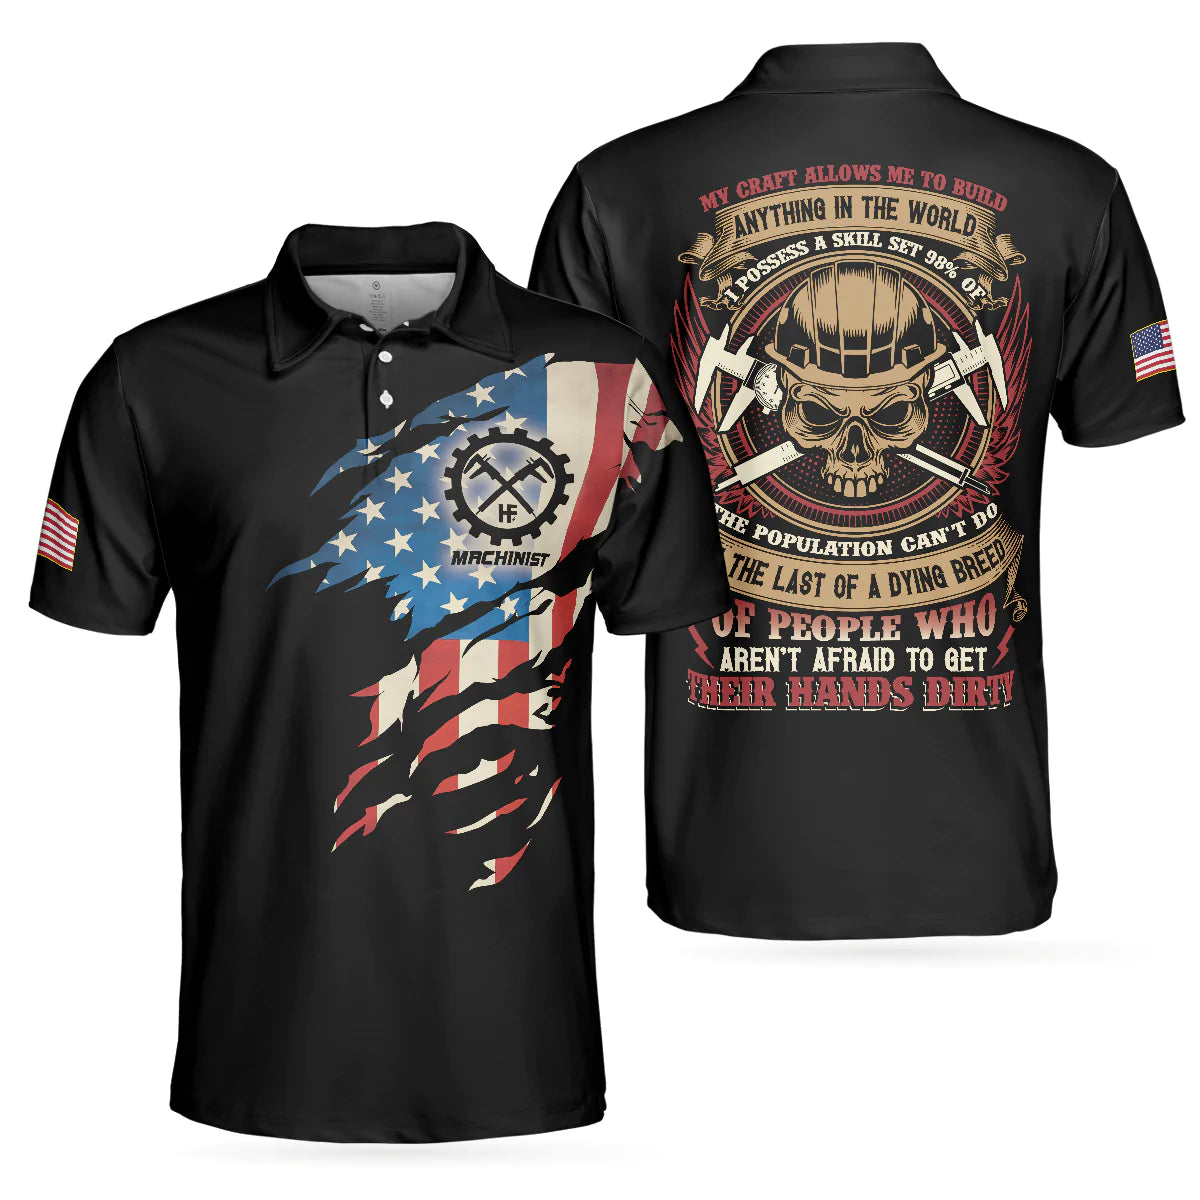 Men Machinist Polo Shirt - Machinist My Craft Allows Me To Build Anything Polo Shirt - Skull American Flag Machinist Shirt For Men